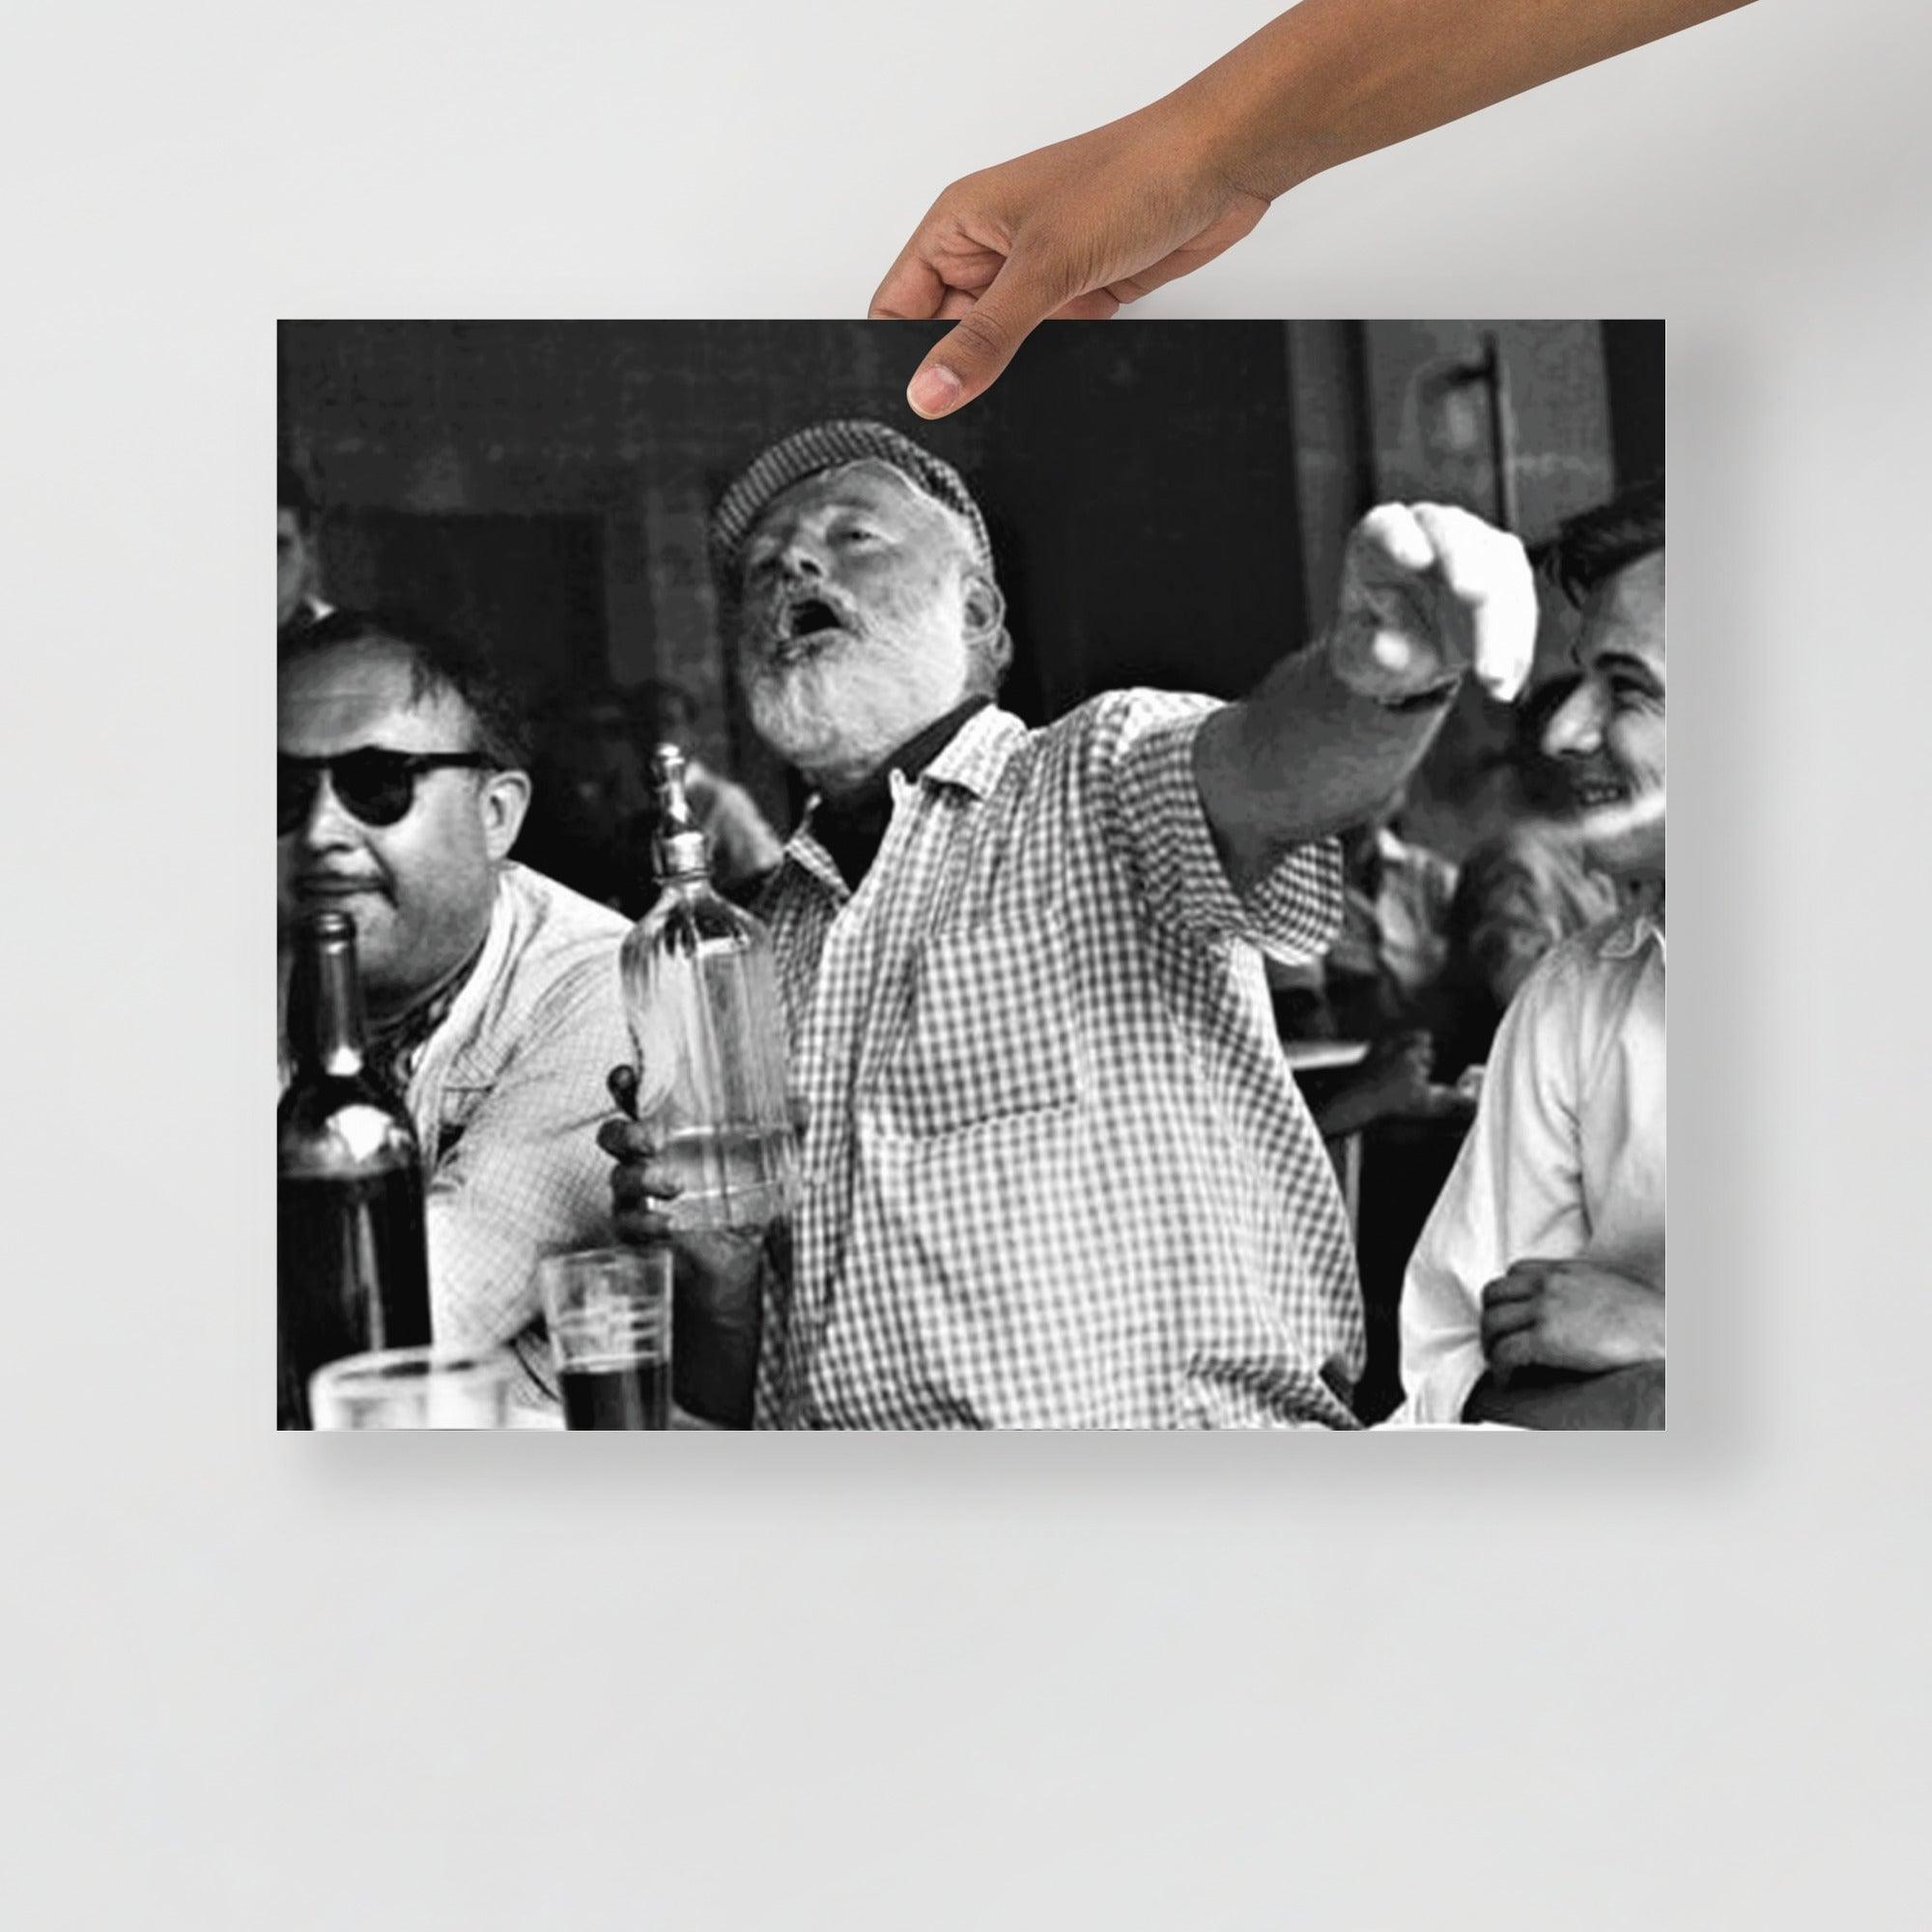 An Ernest Hemingway at a Bar poster on a plain backdrop in size 16x20”.